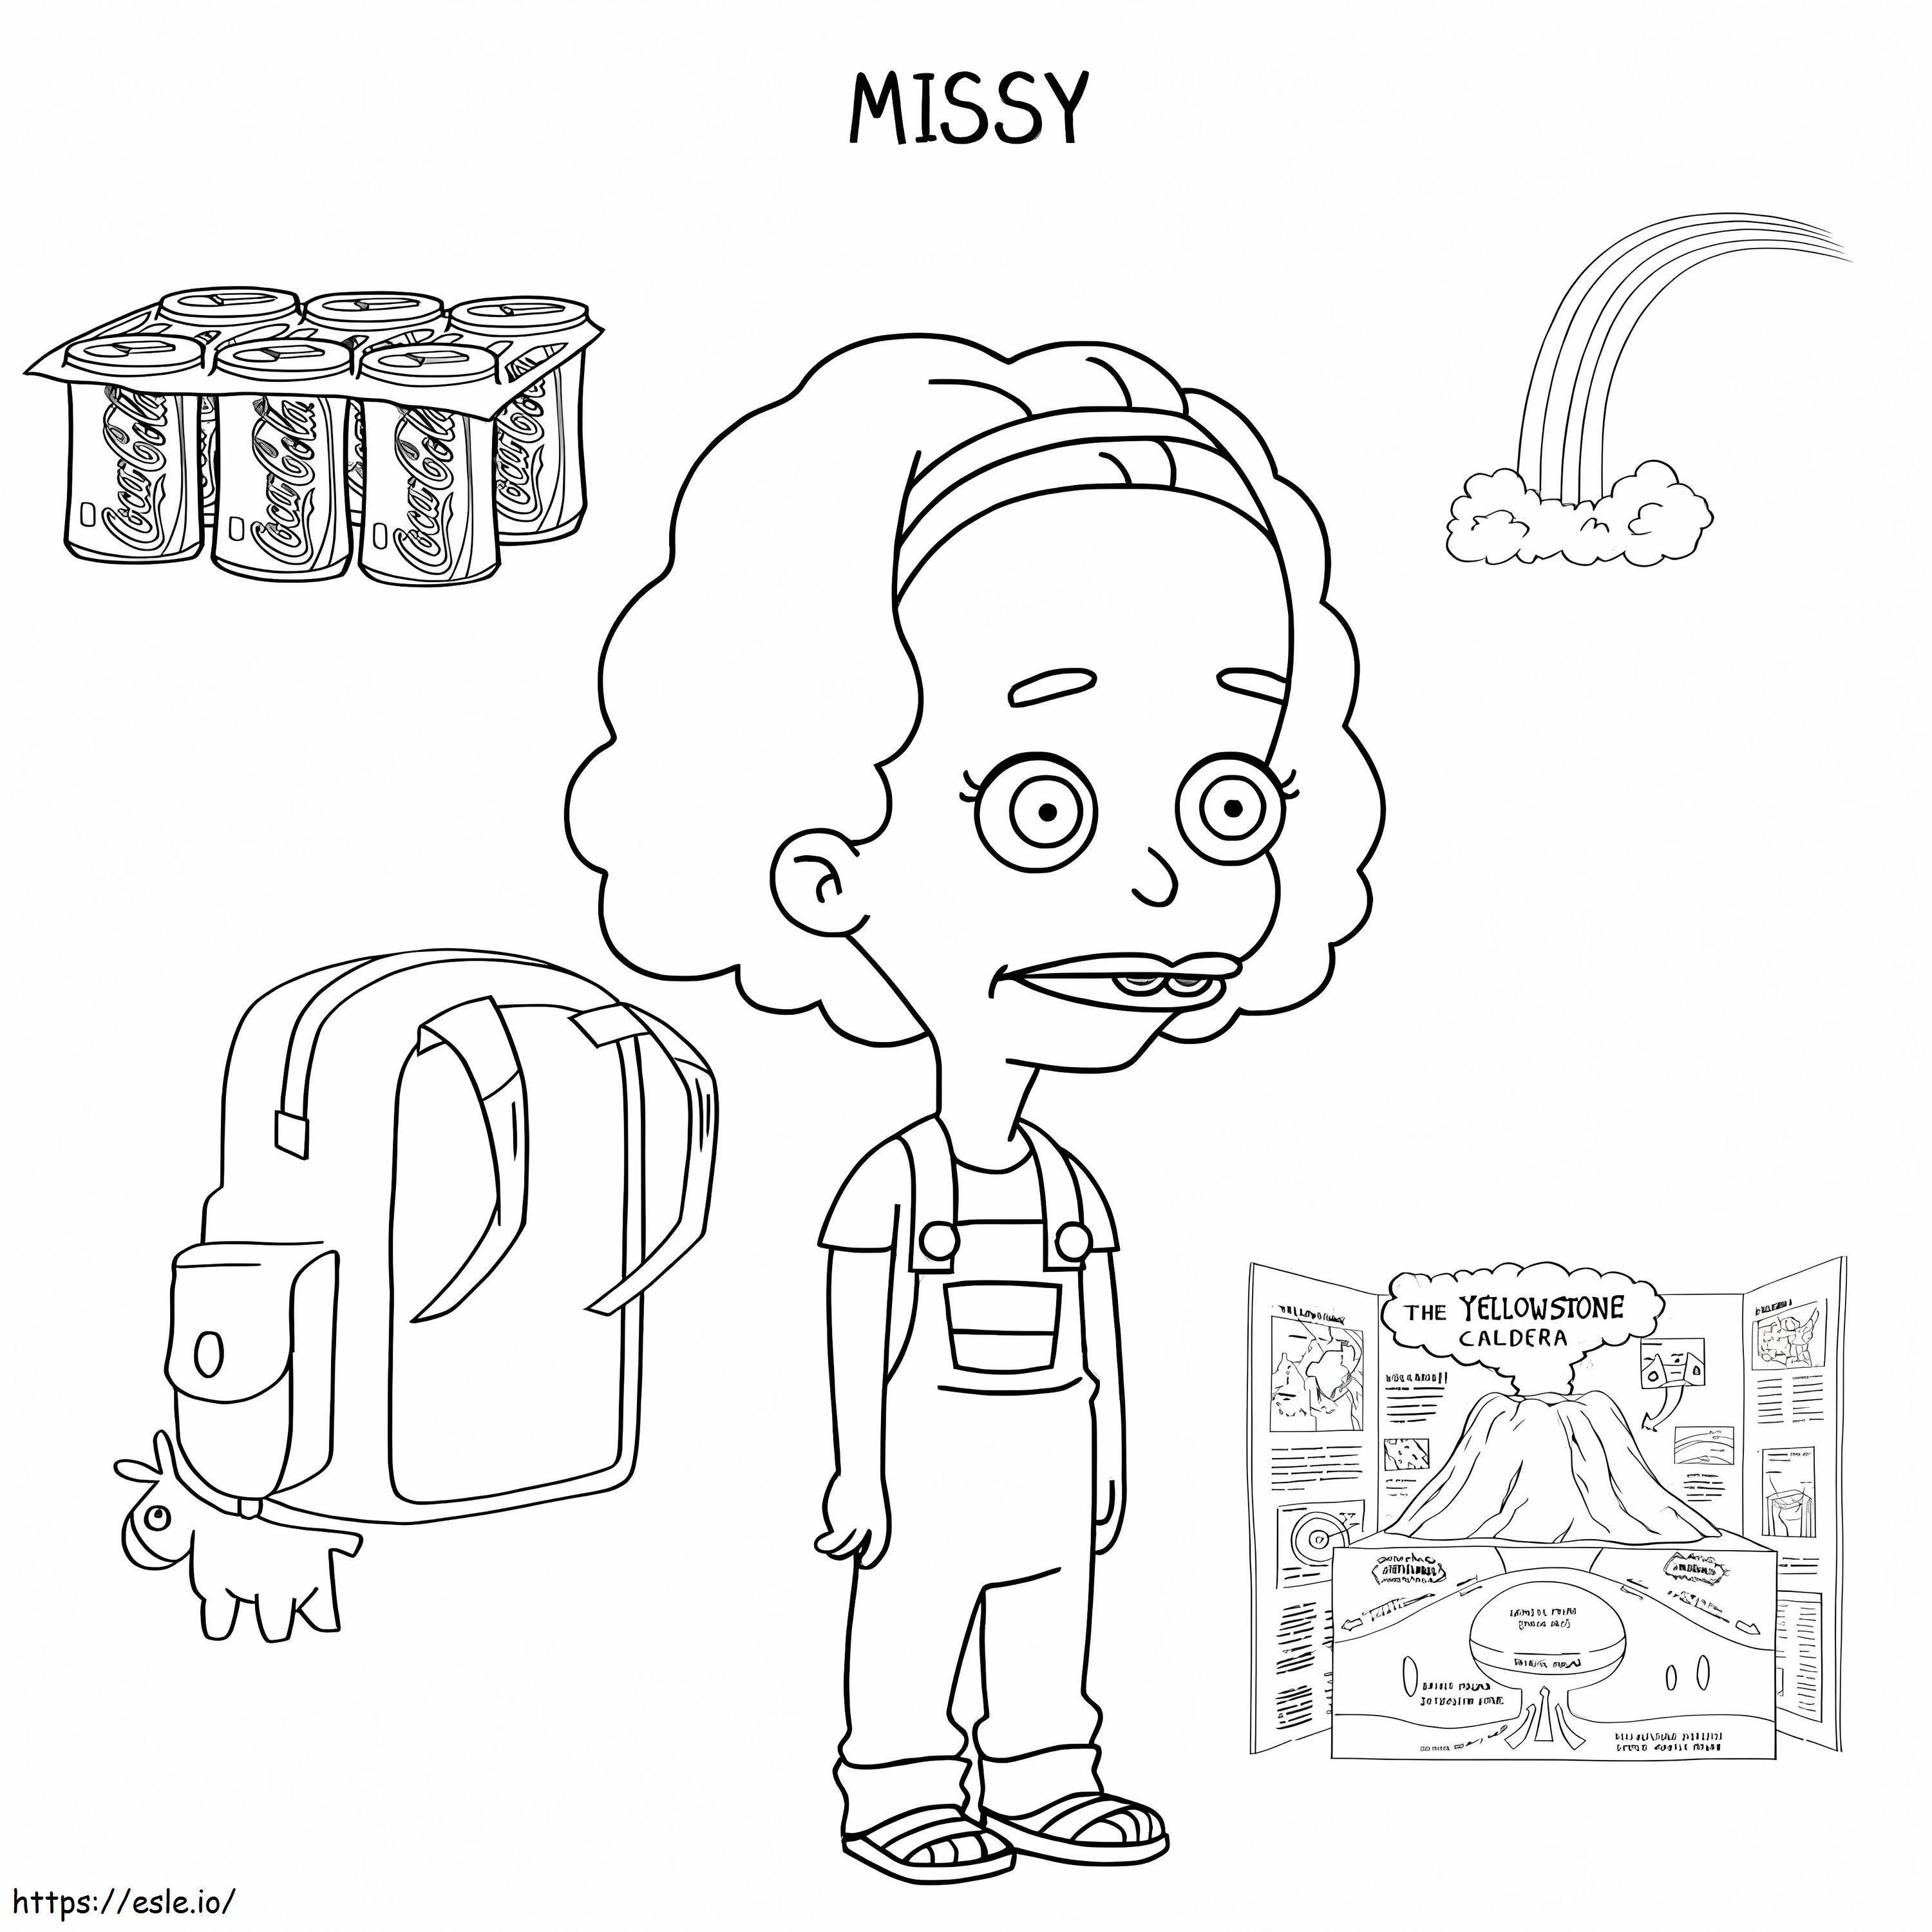 Missy coloring page